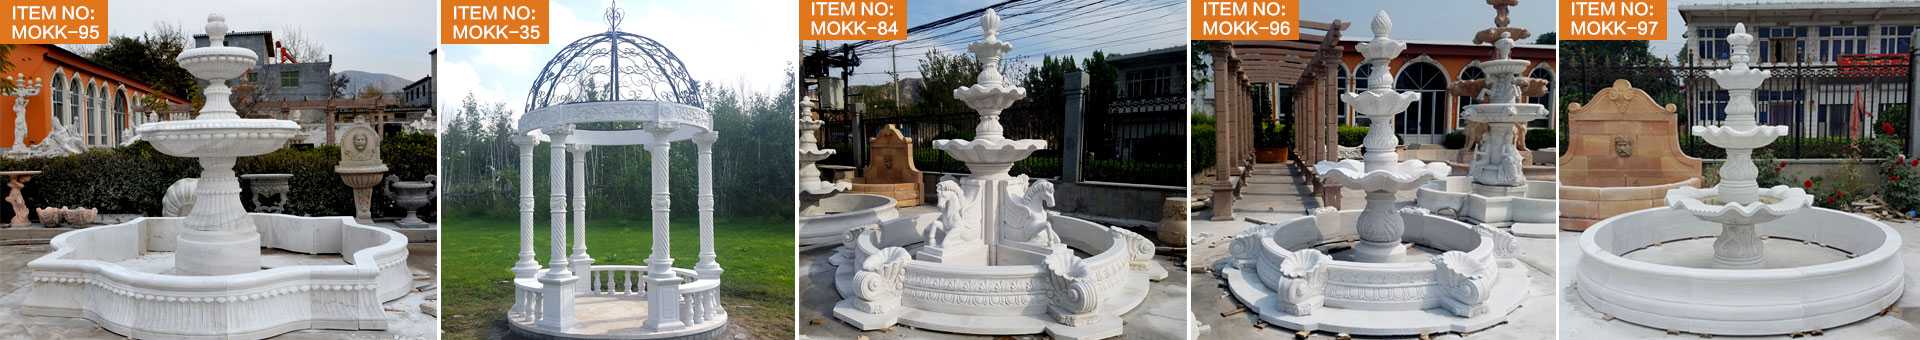 Marble Carving Sculpture